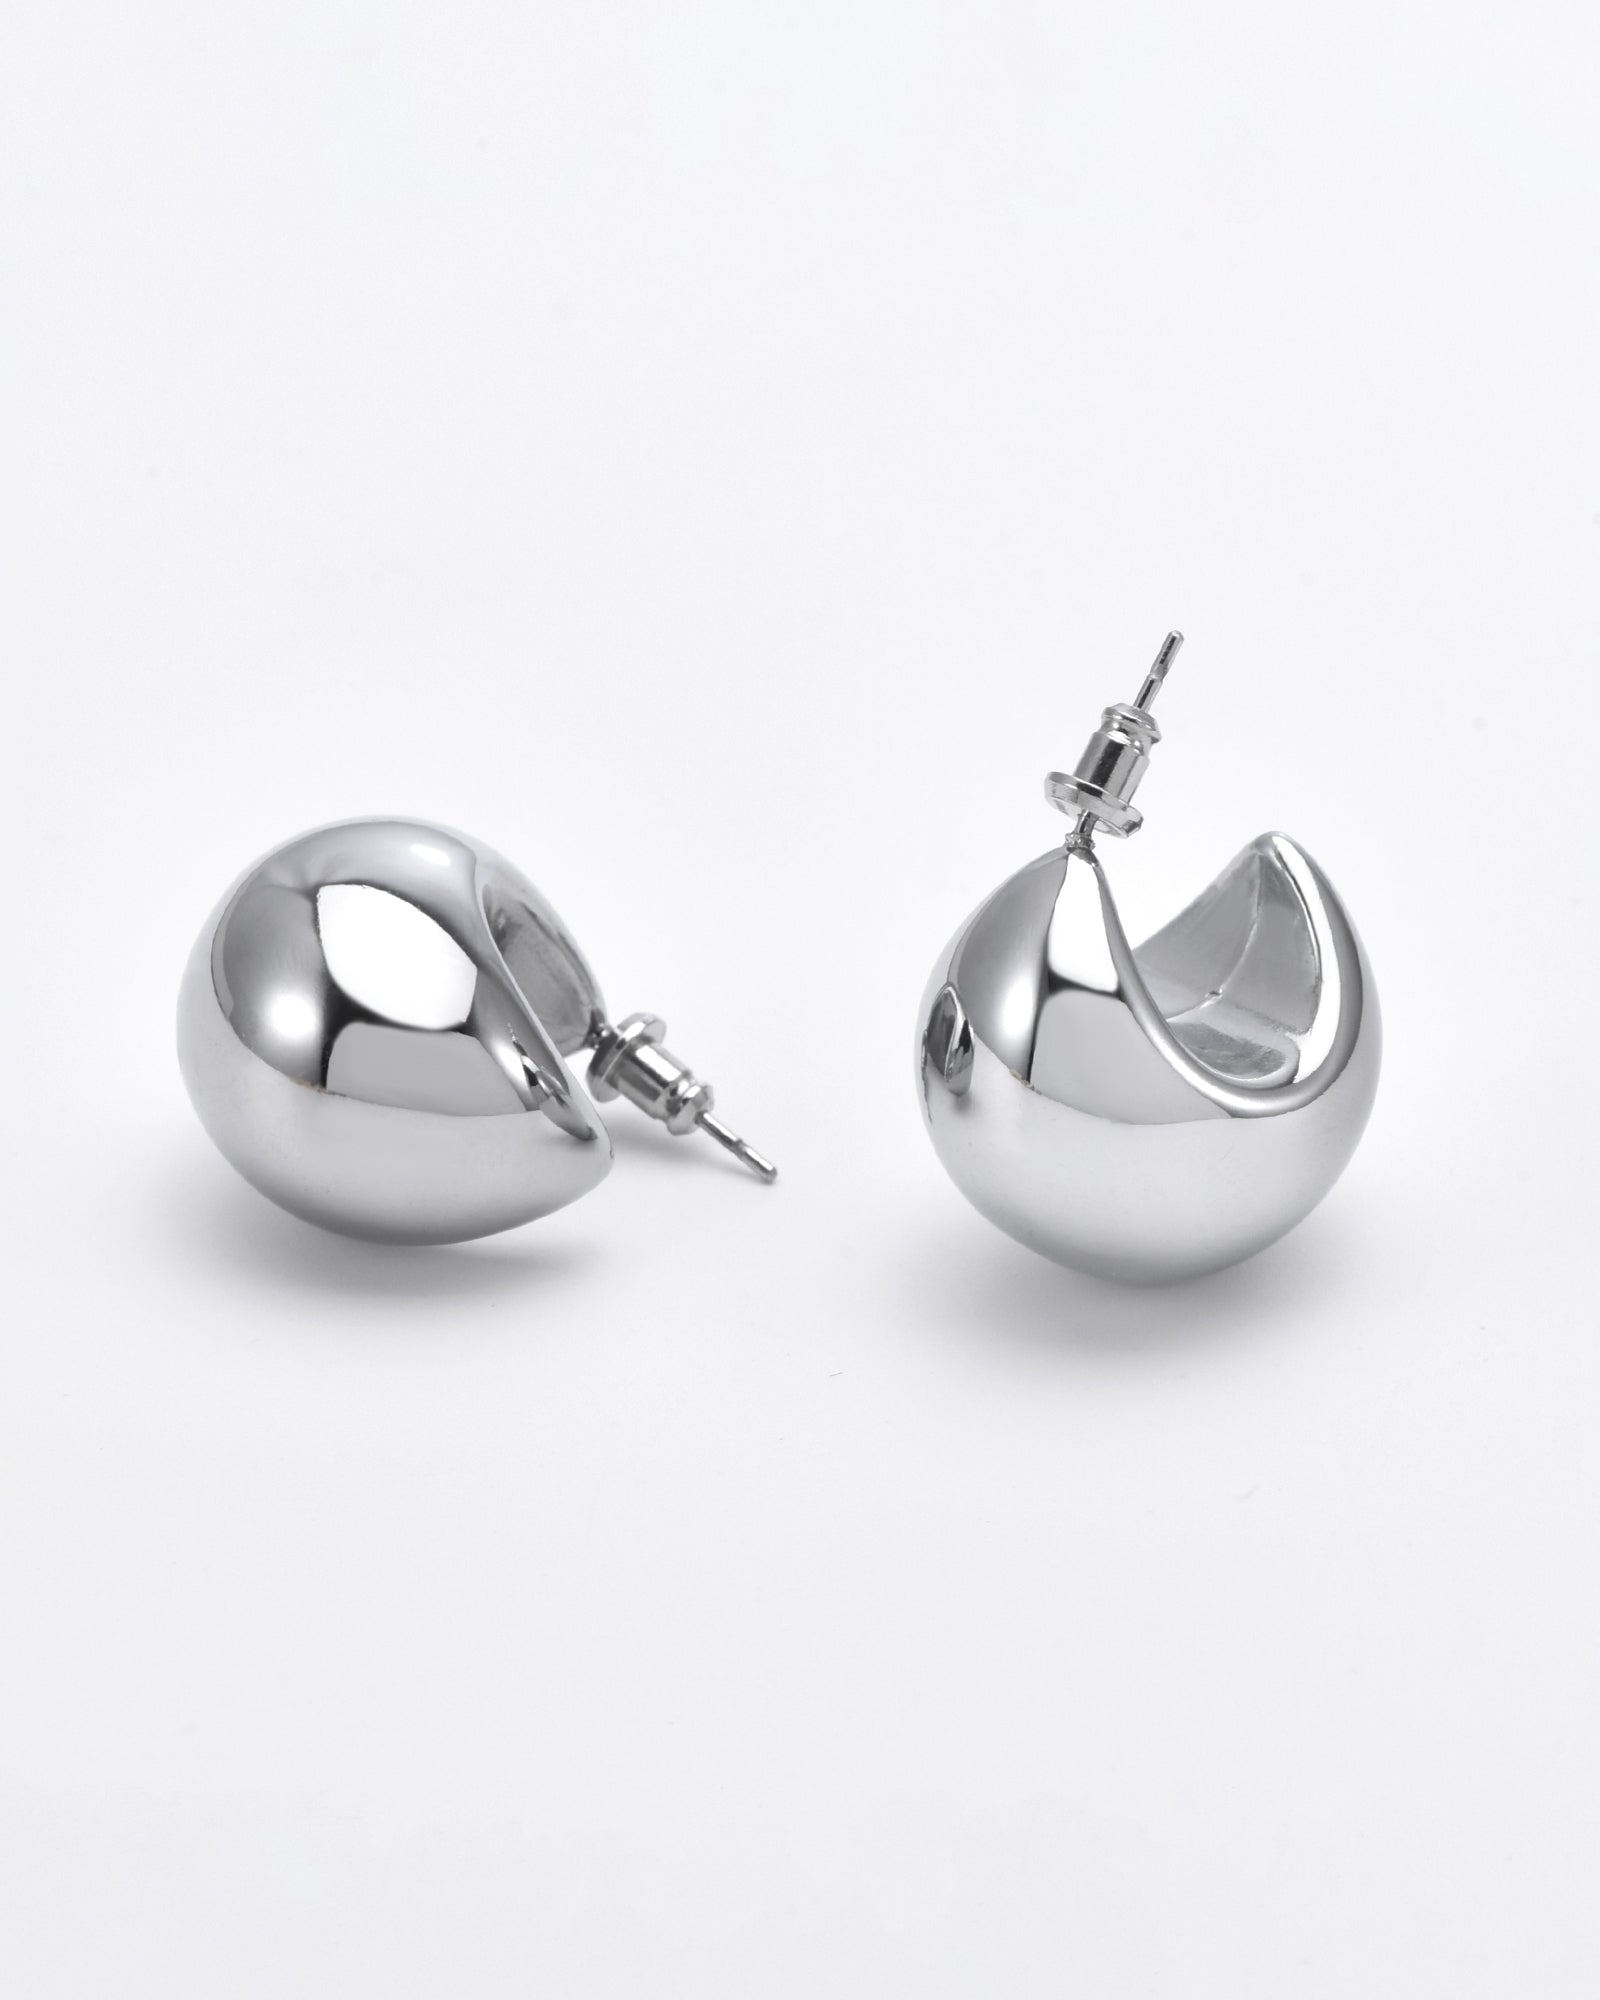 Close-up of a pair of shiny, hypoallergenic Orbit Earrings Silver by For Art's Sake®. One earring is lying on its side, showing a smooth, rounded surface. The other is upright, revealing an open, curved back reminiscent of For Art's Sake® earrings. The background is a plain white surface.